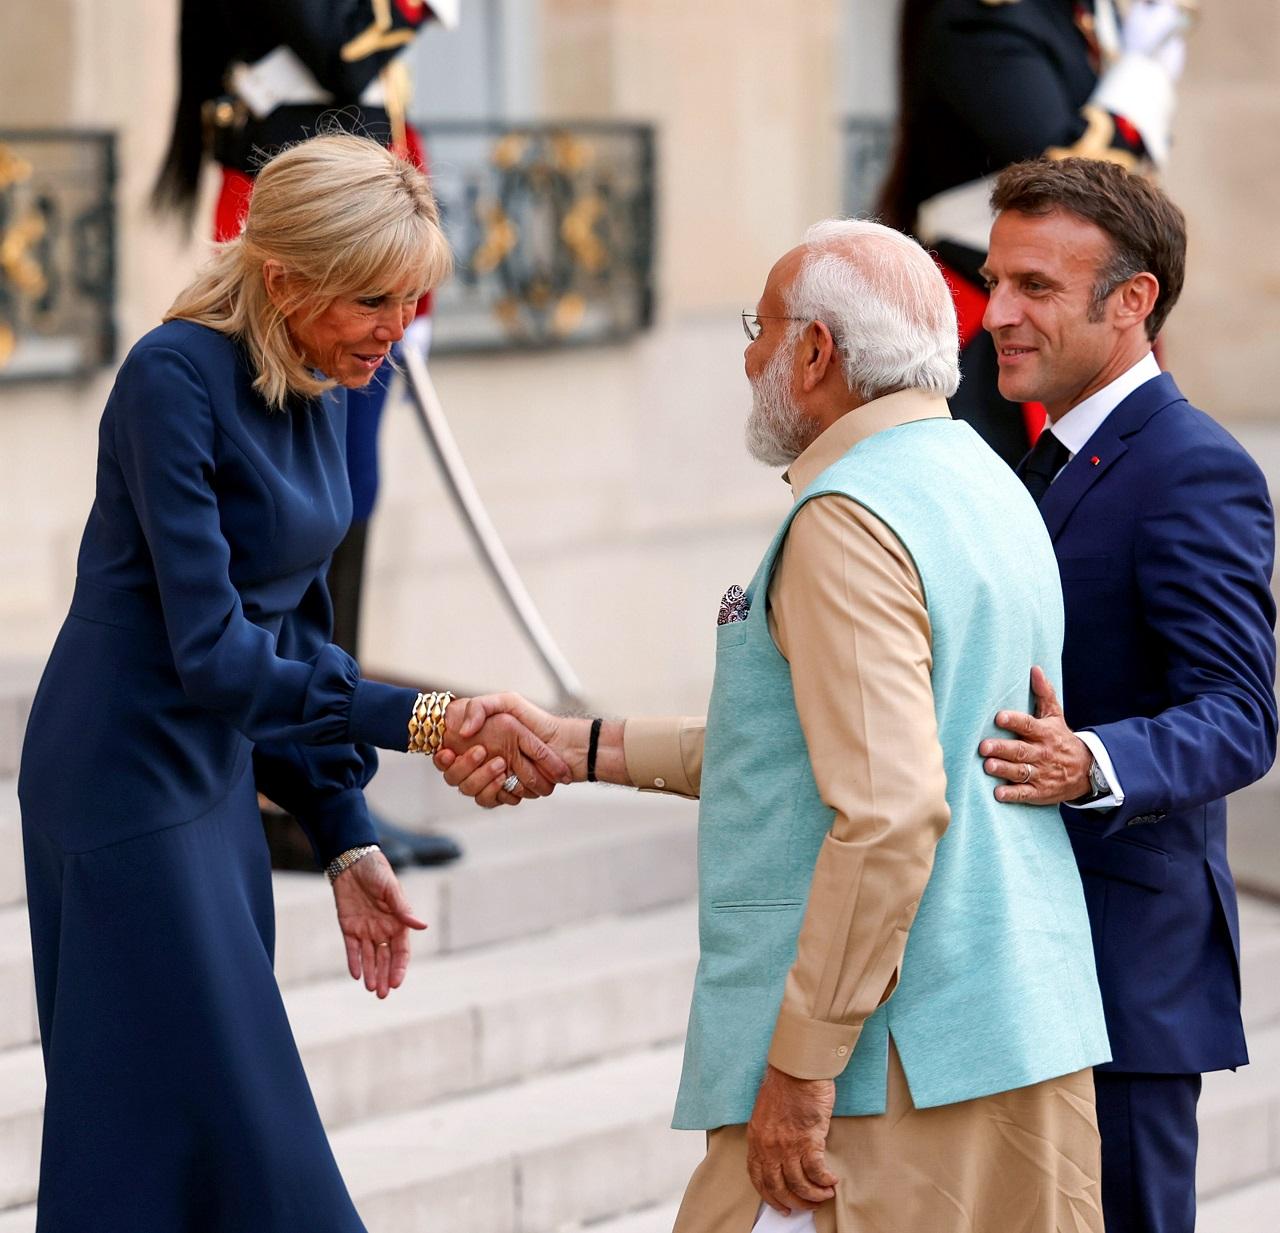 PM Modi received the Order of St. Andrew Award from Russia in 2019, and the Order of Zayed Award from the UAE in 2019. He also received the Grand Collar of the State of Palestine Award in 2018, the State Order of Ghazi Amir Amanullah Khan from Afghanistan in 2016 and the Order of Abdulaziz Al Saud from Saudia Arabia in 2016